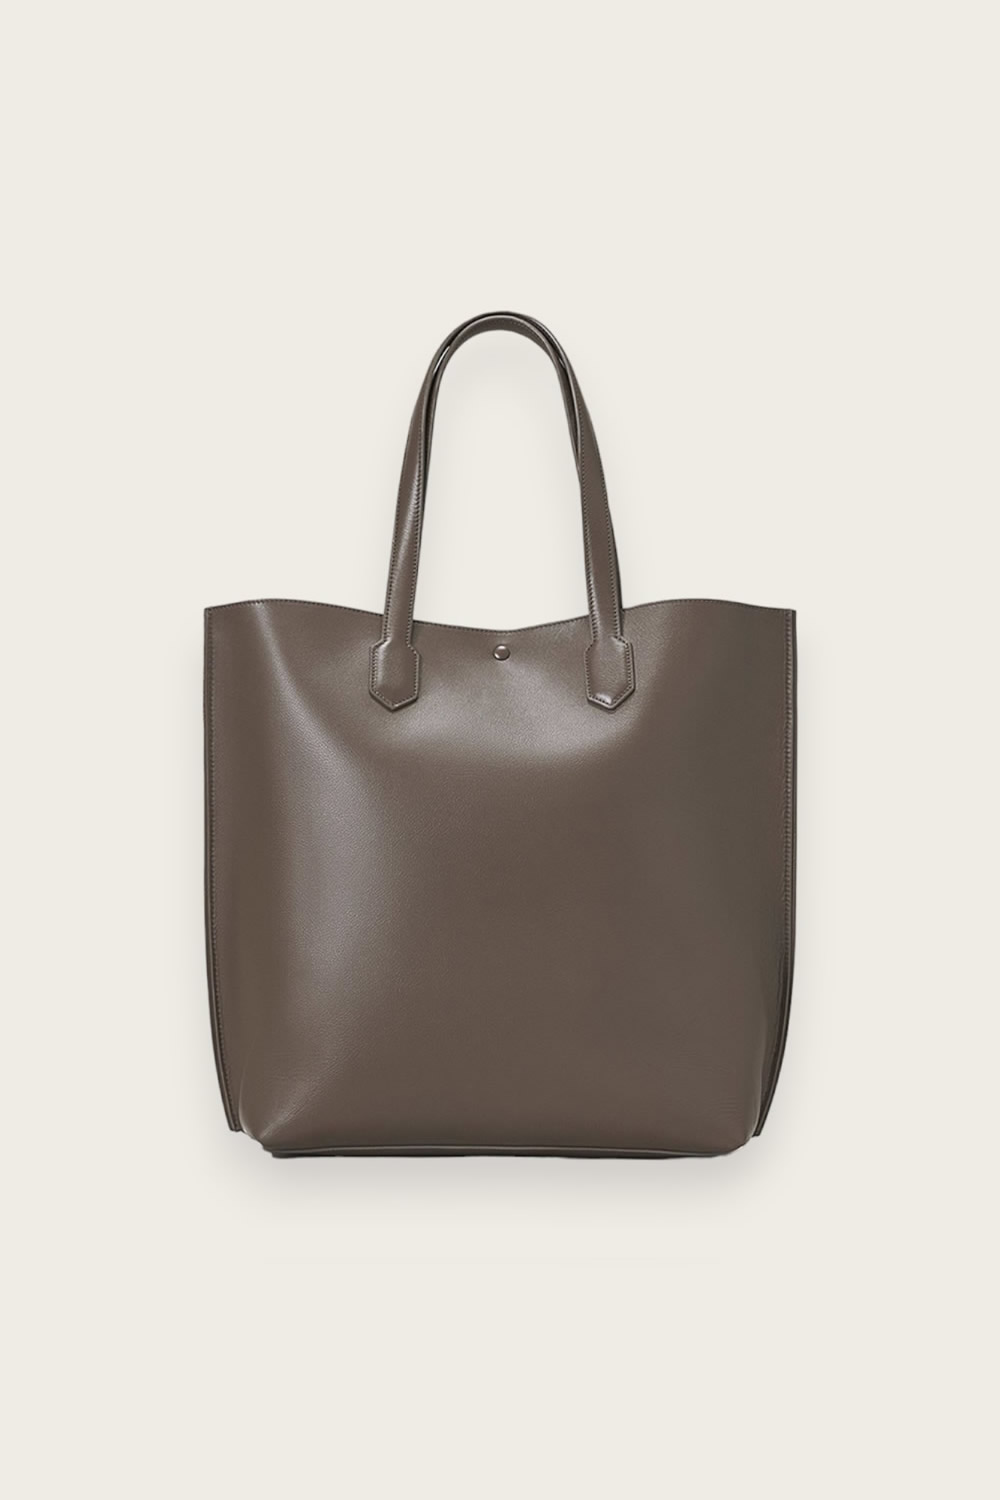 North South Tote: Oversized Leather Tote Bag - Aman Essentials